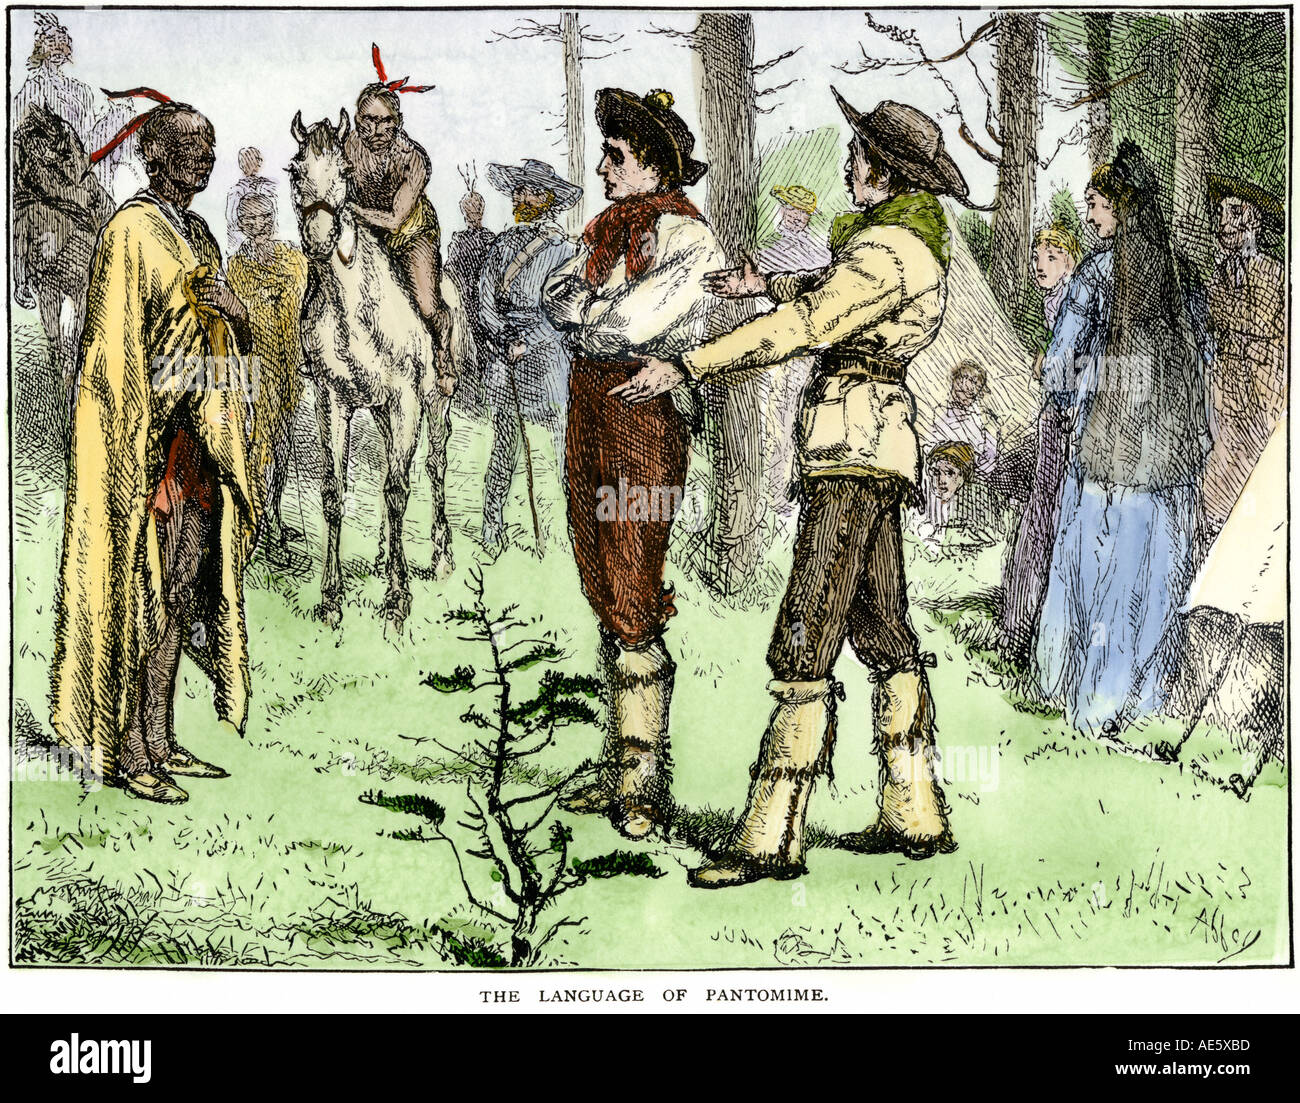 Fur traders and Native Americans conversing in pantomine. Hand-colored woodcut Stock Photo